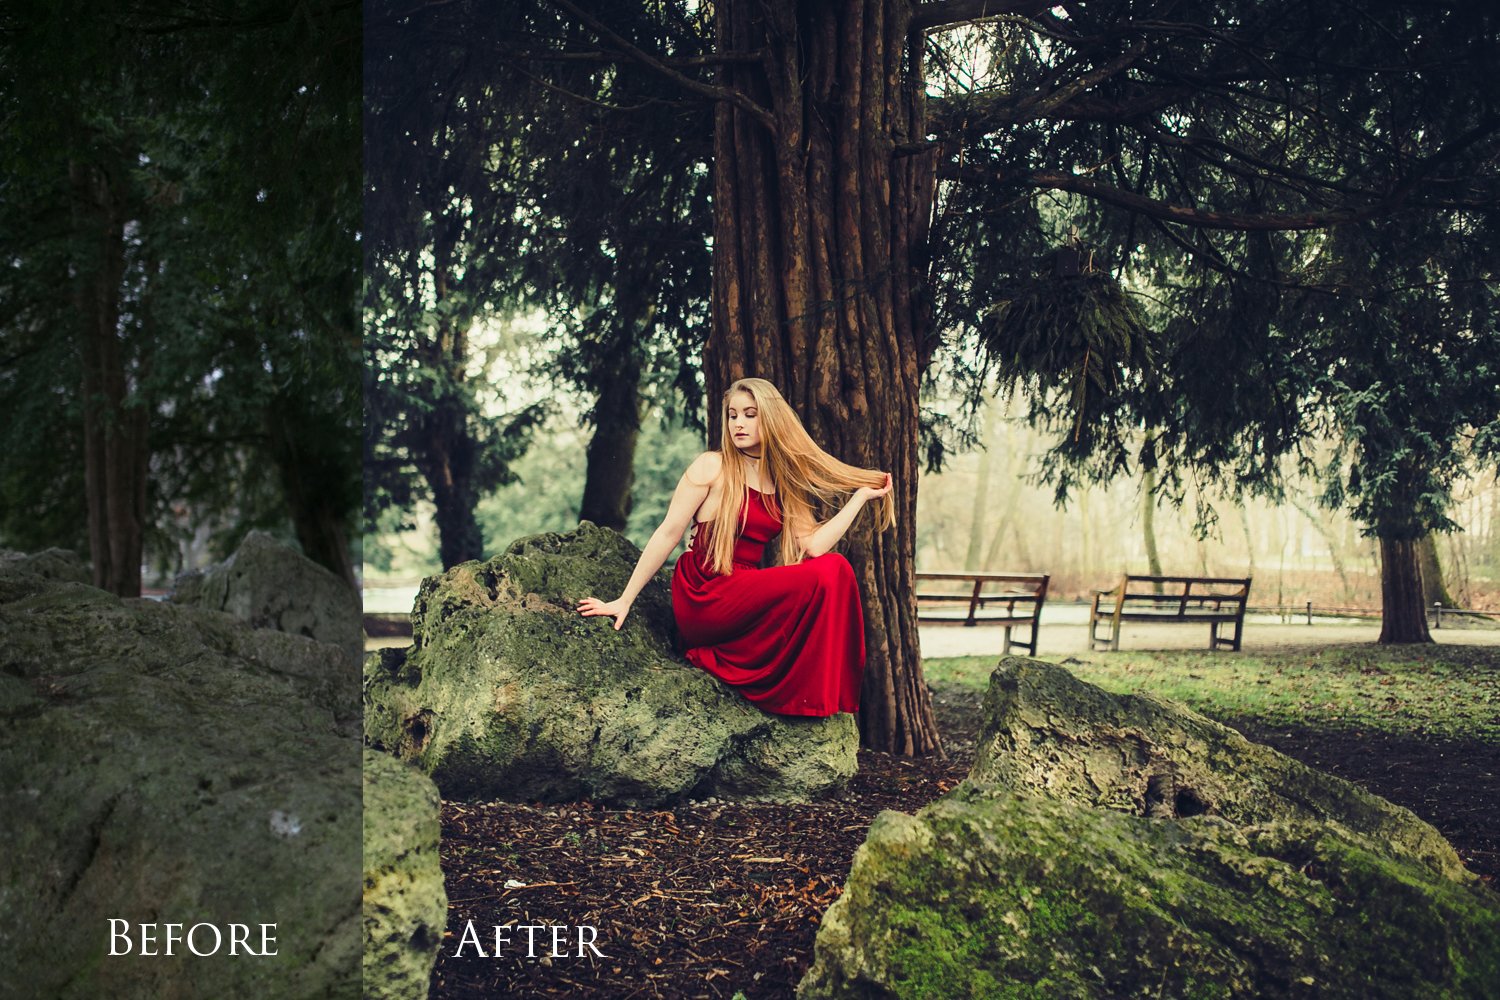 Amelie (part I)-18 Presets for Lrpreview image.